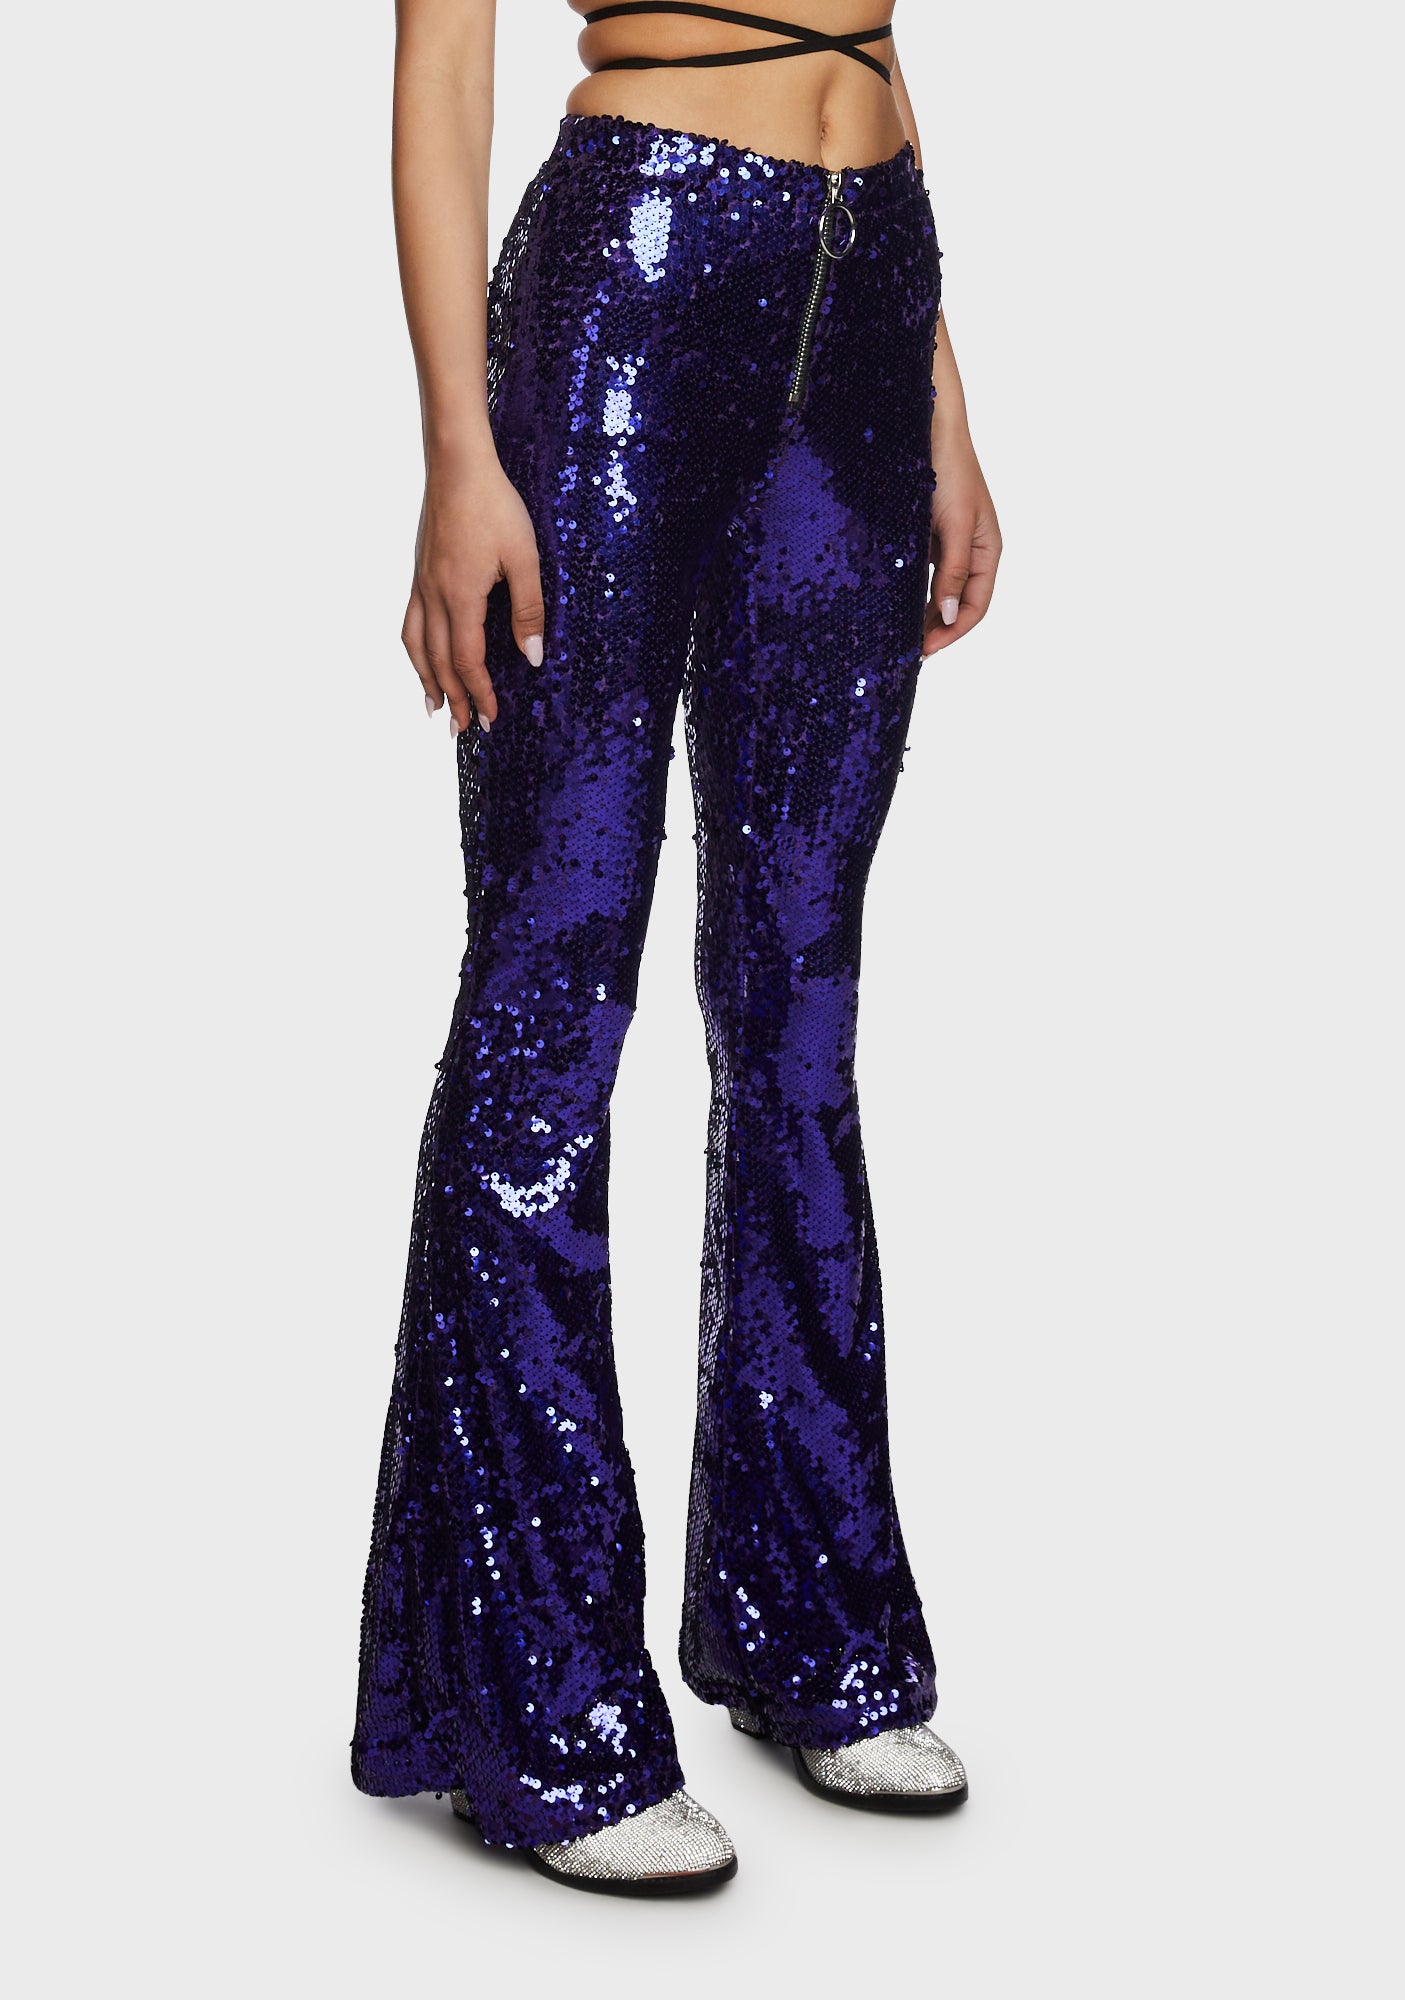 Buy Glitter Pants Online In India  Etsy India